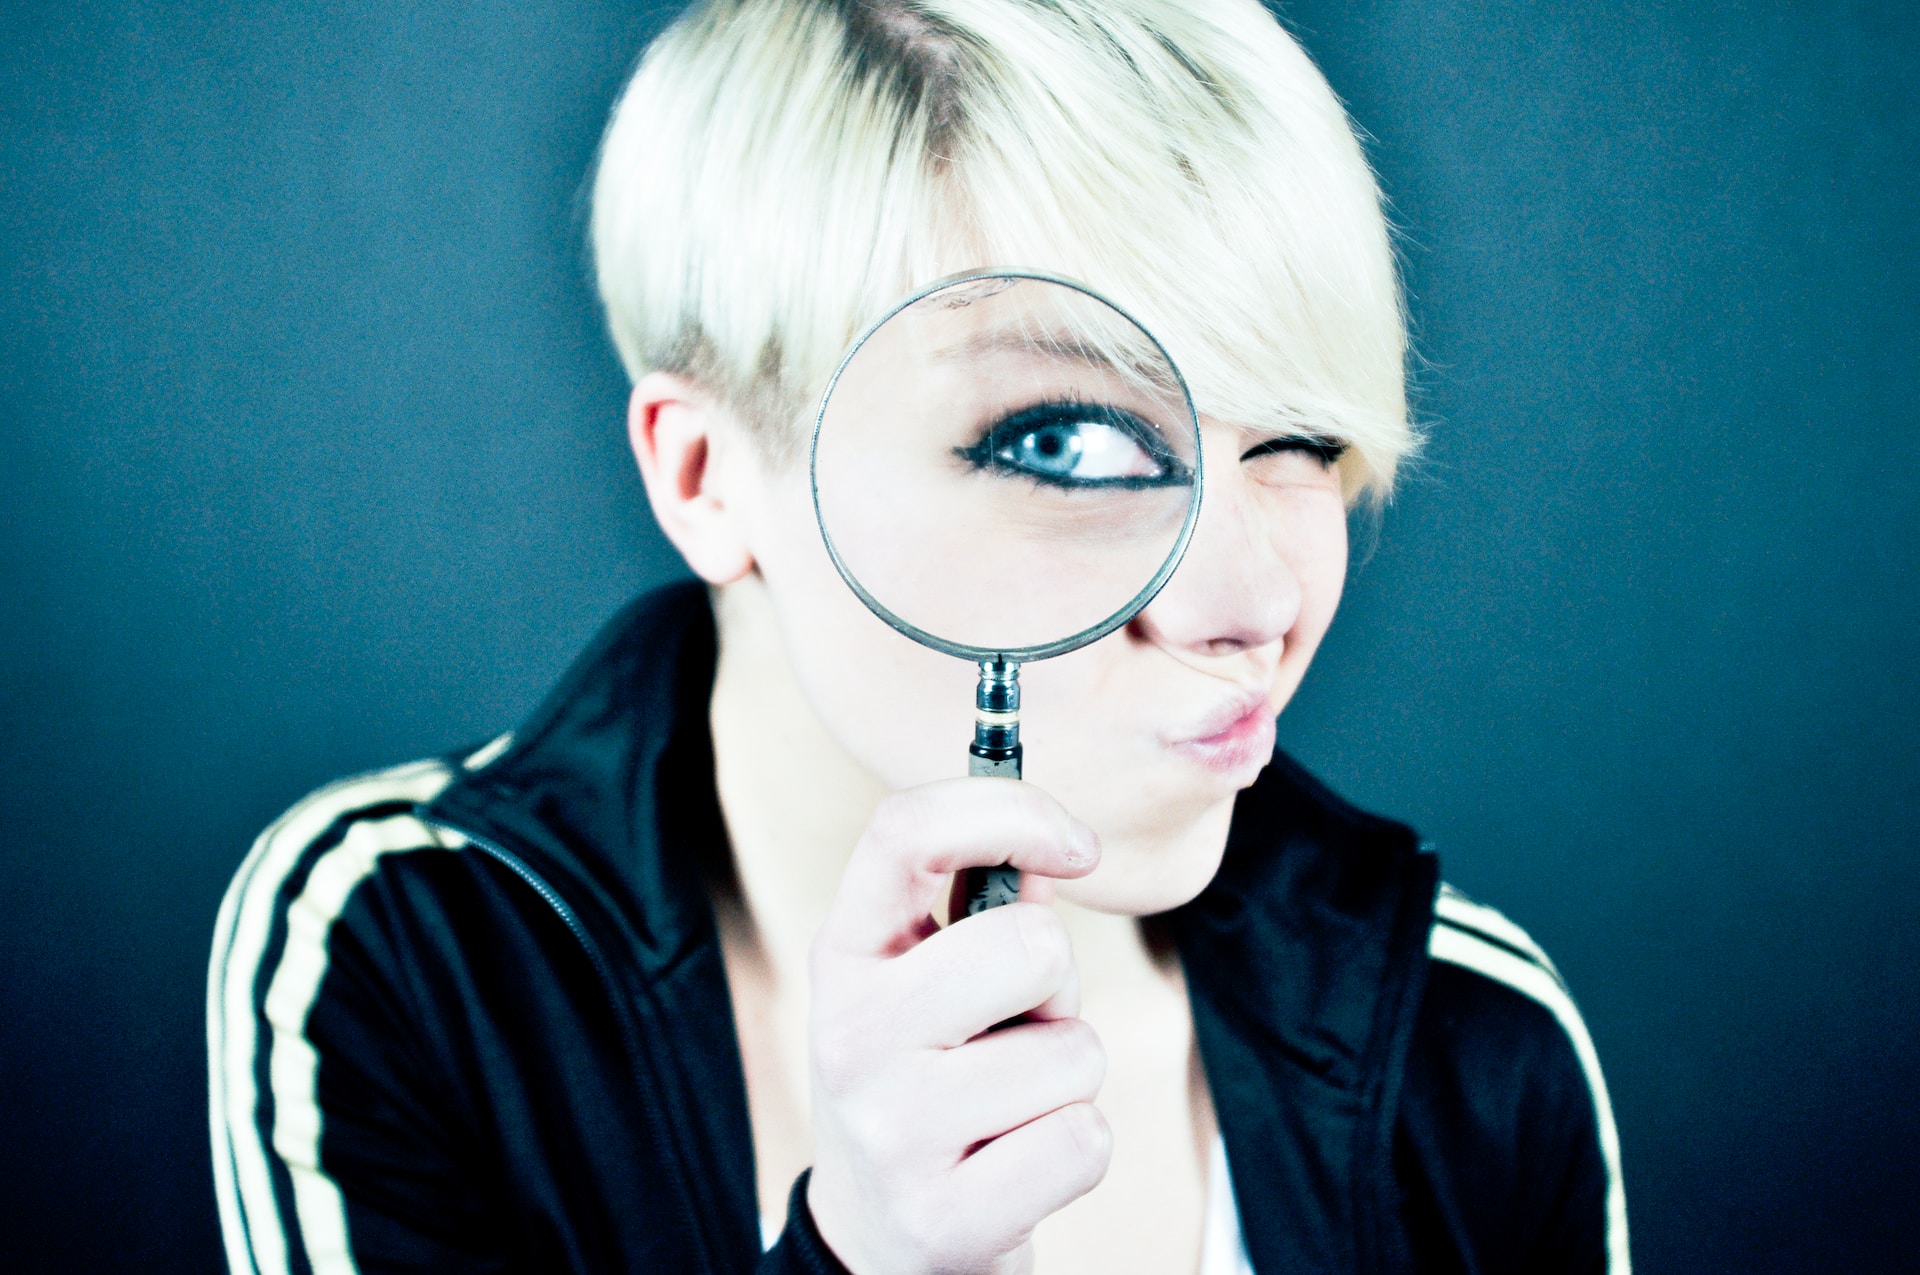 Image shows a lady looking through a magnifying glass, as if she is looking for her IngramSpark sales.